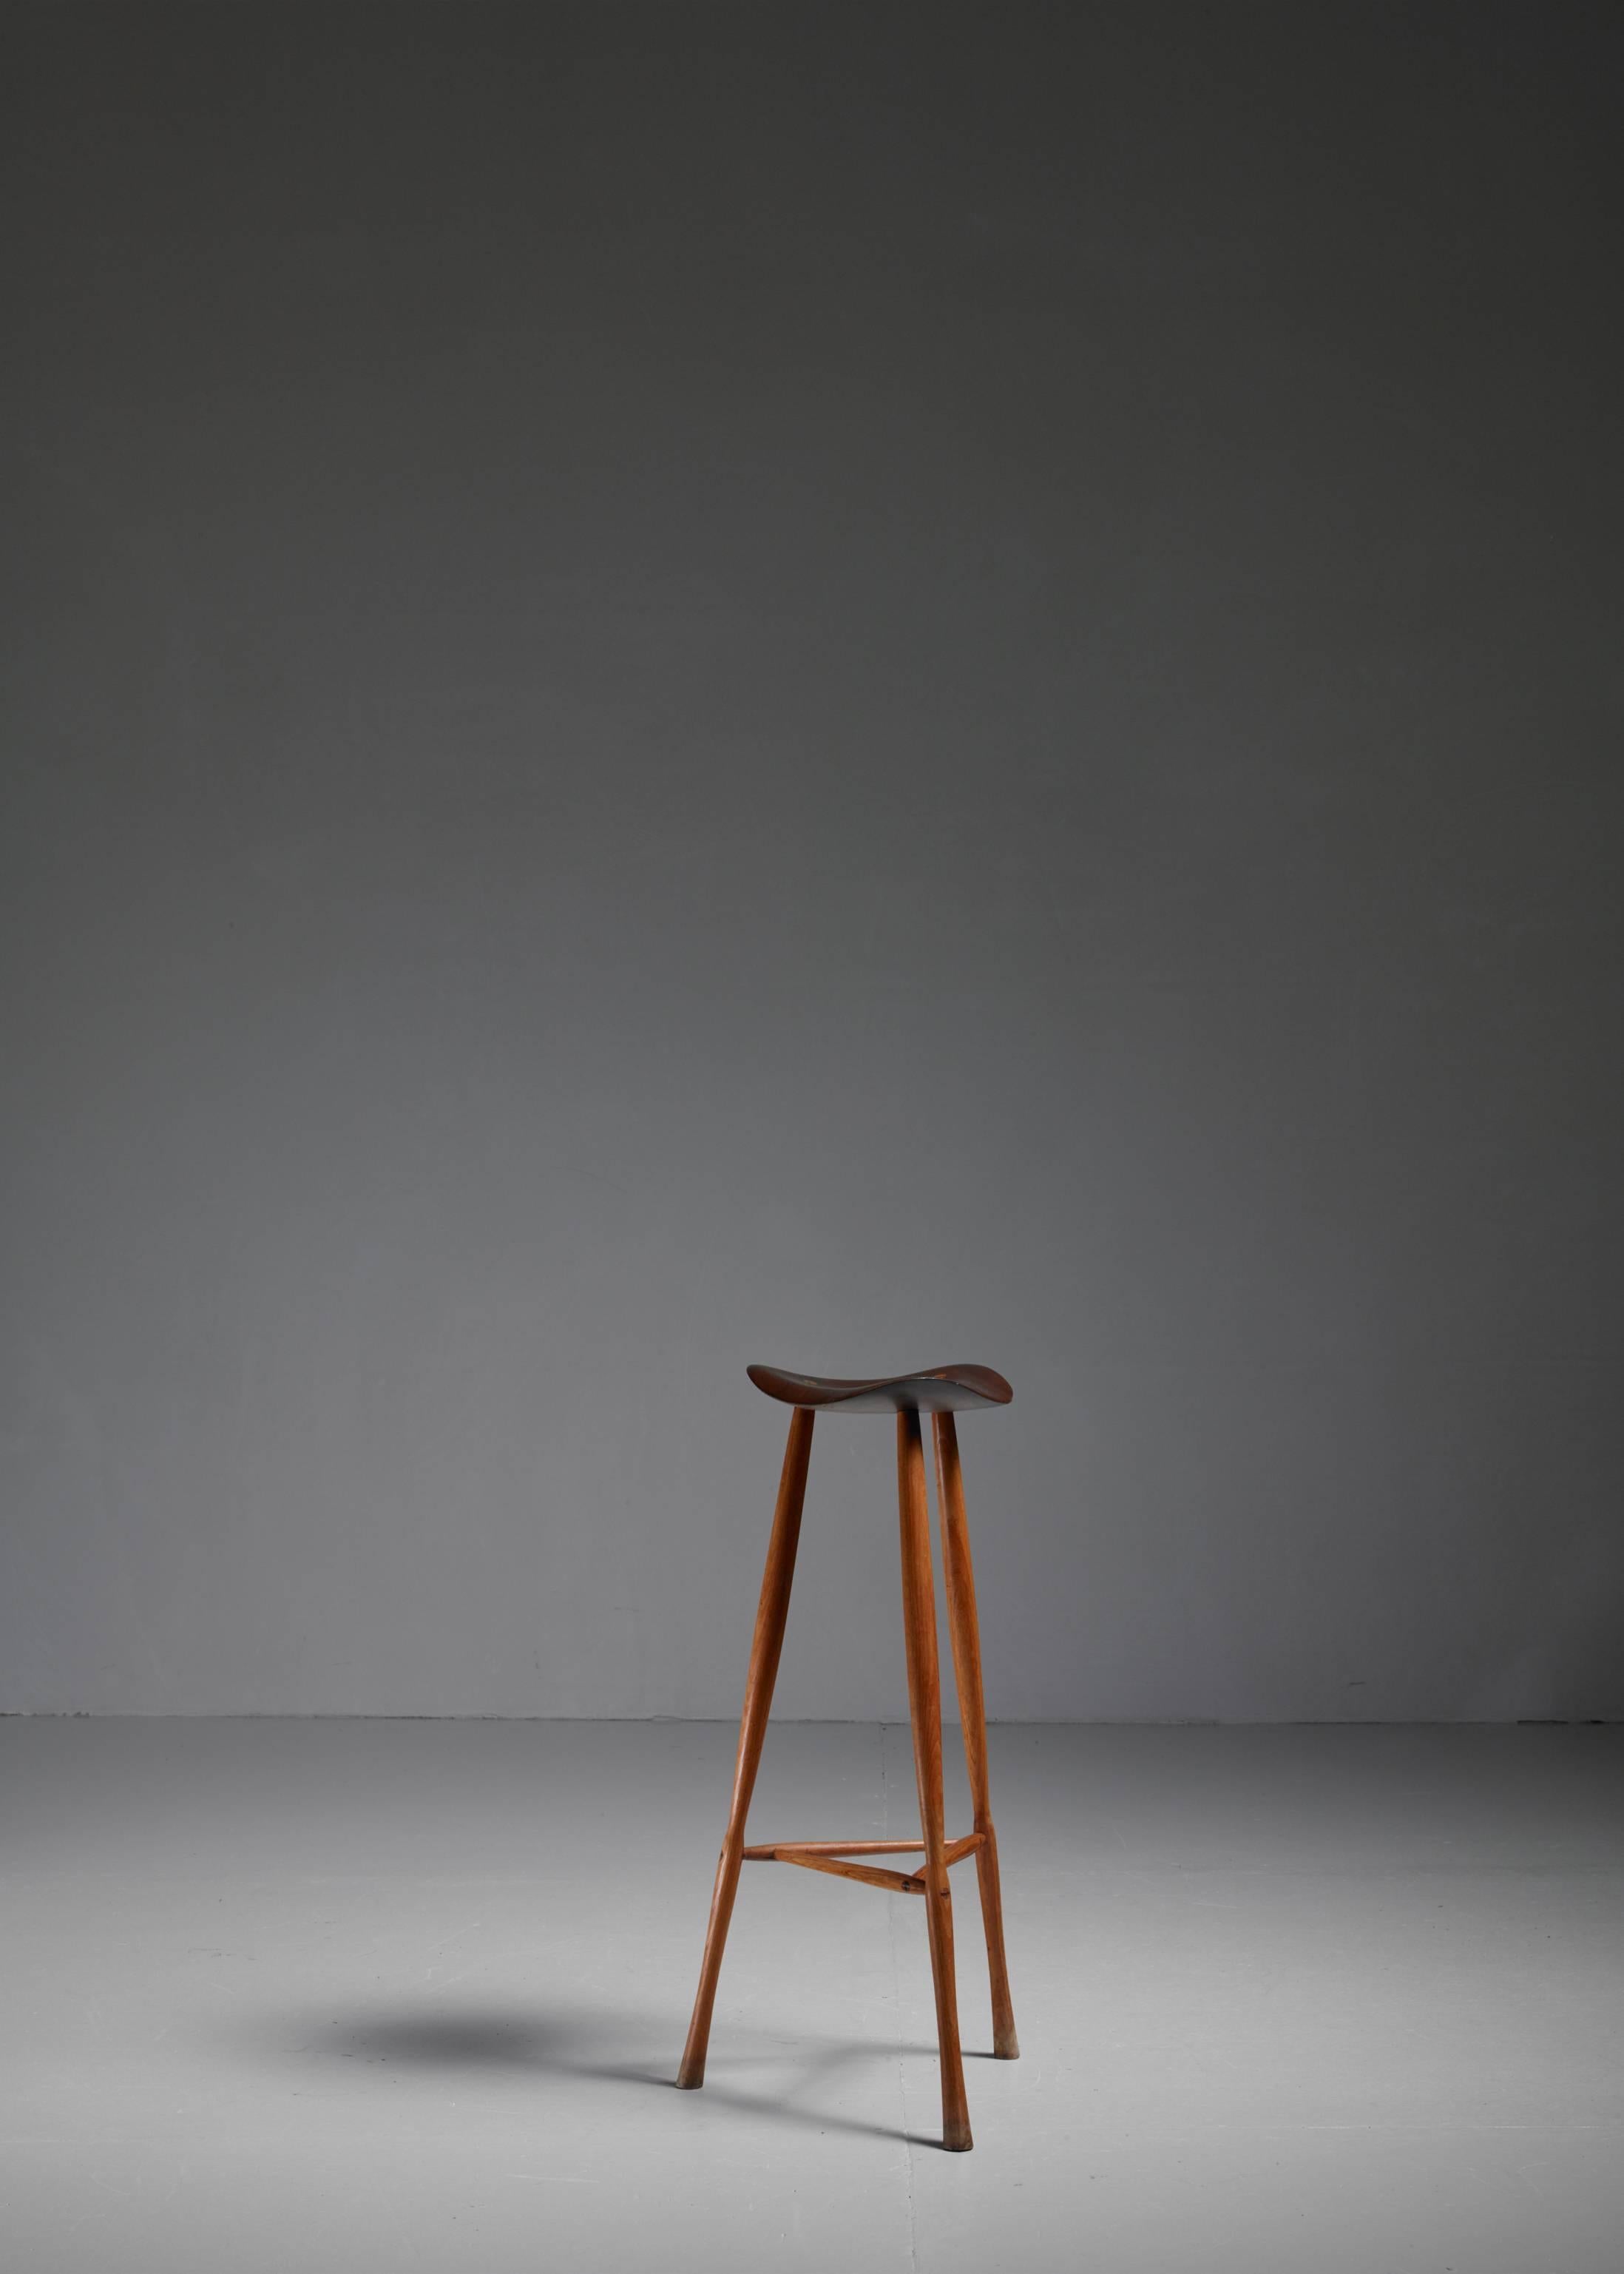 A high Benin teak stool by American craftsman Karl Seemuller. The stool is signed and dated '8-4-73'. The sculpted seating has a diameter of 26.5 cm (10.5").
* This is piece is offered to you by Bloomberry, Amsterdam * 